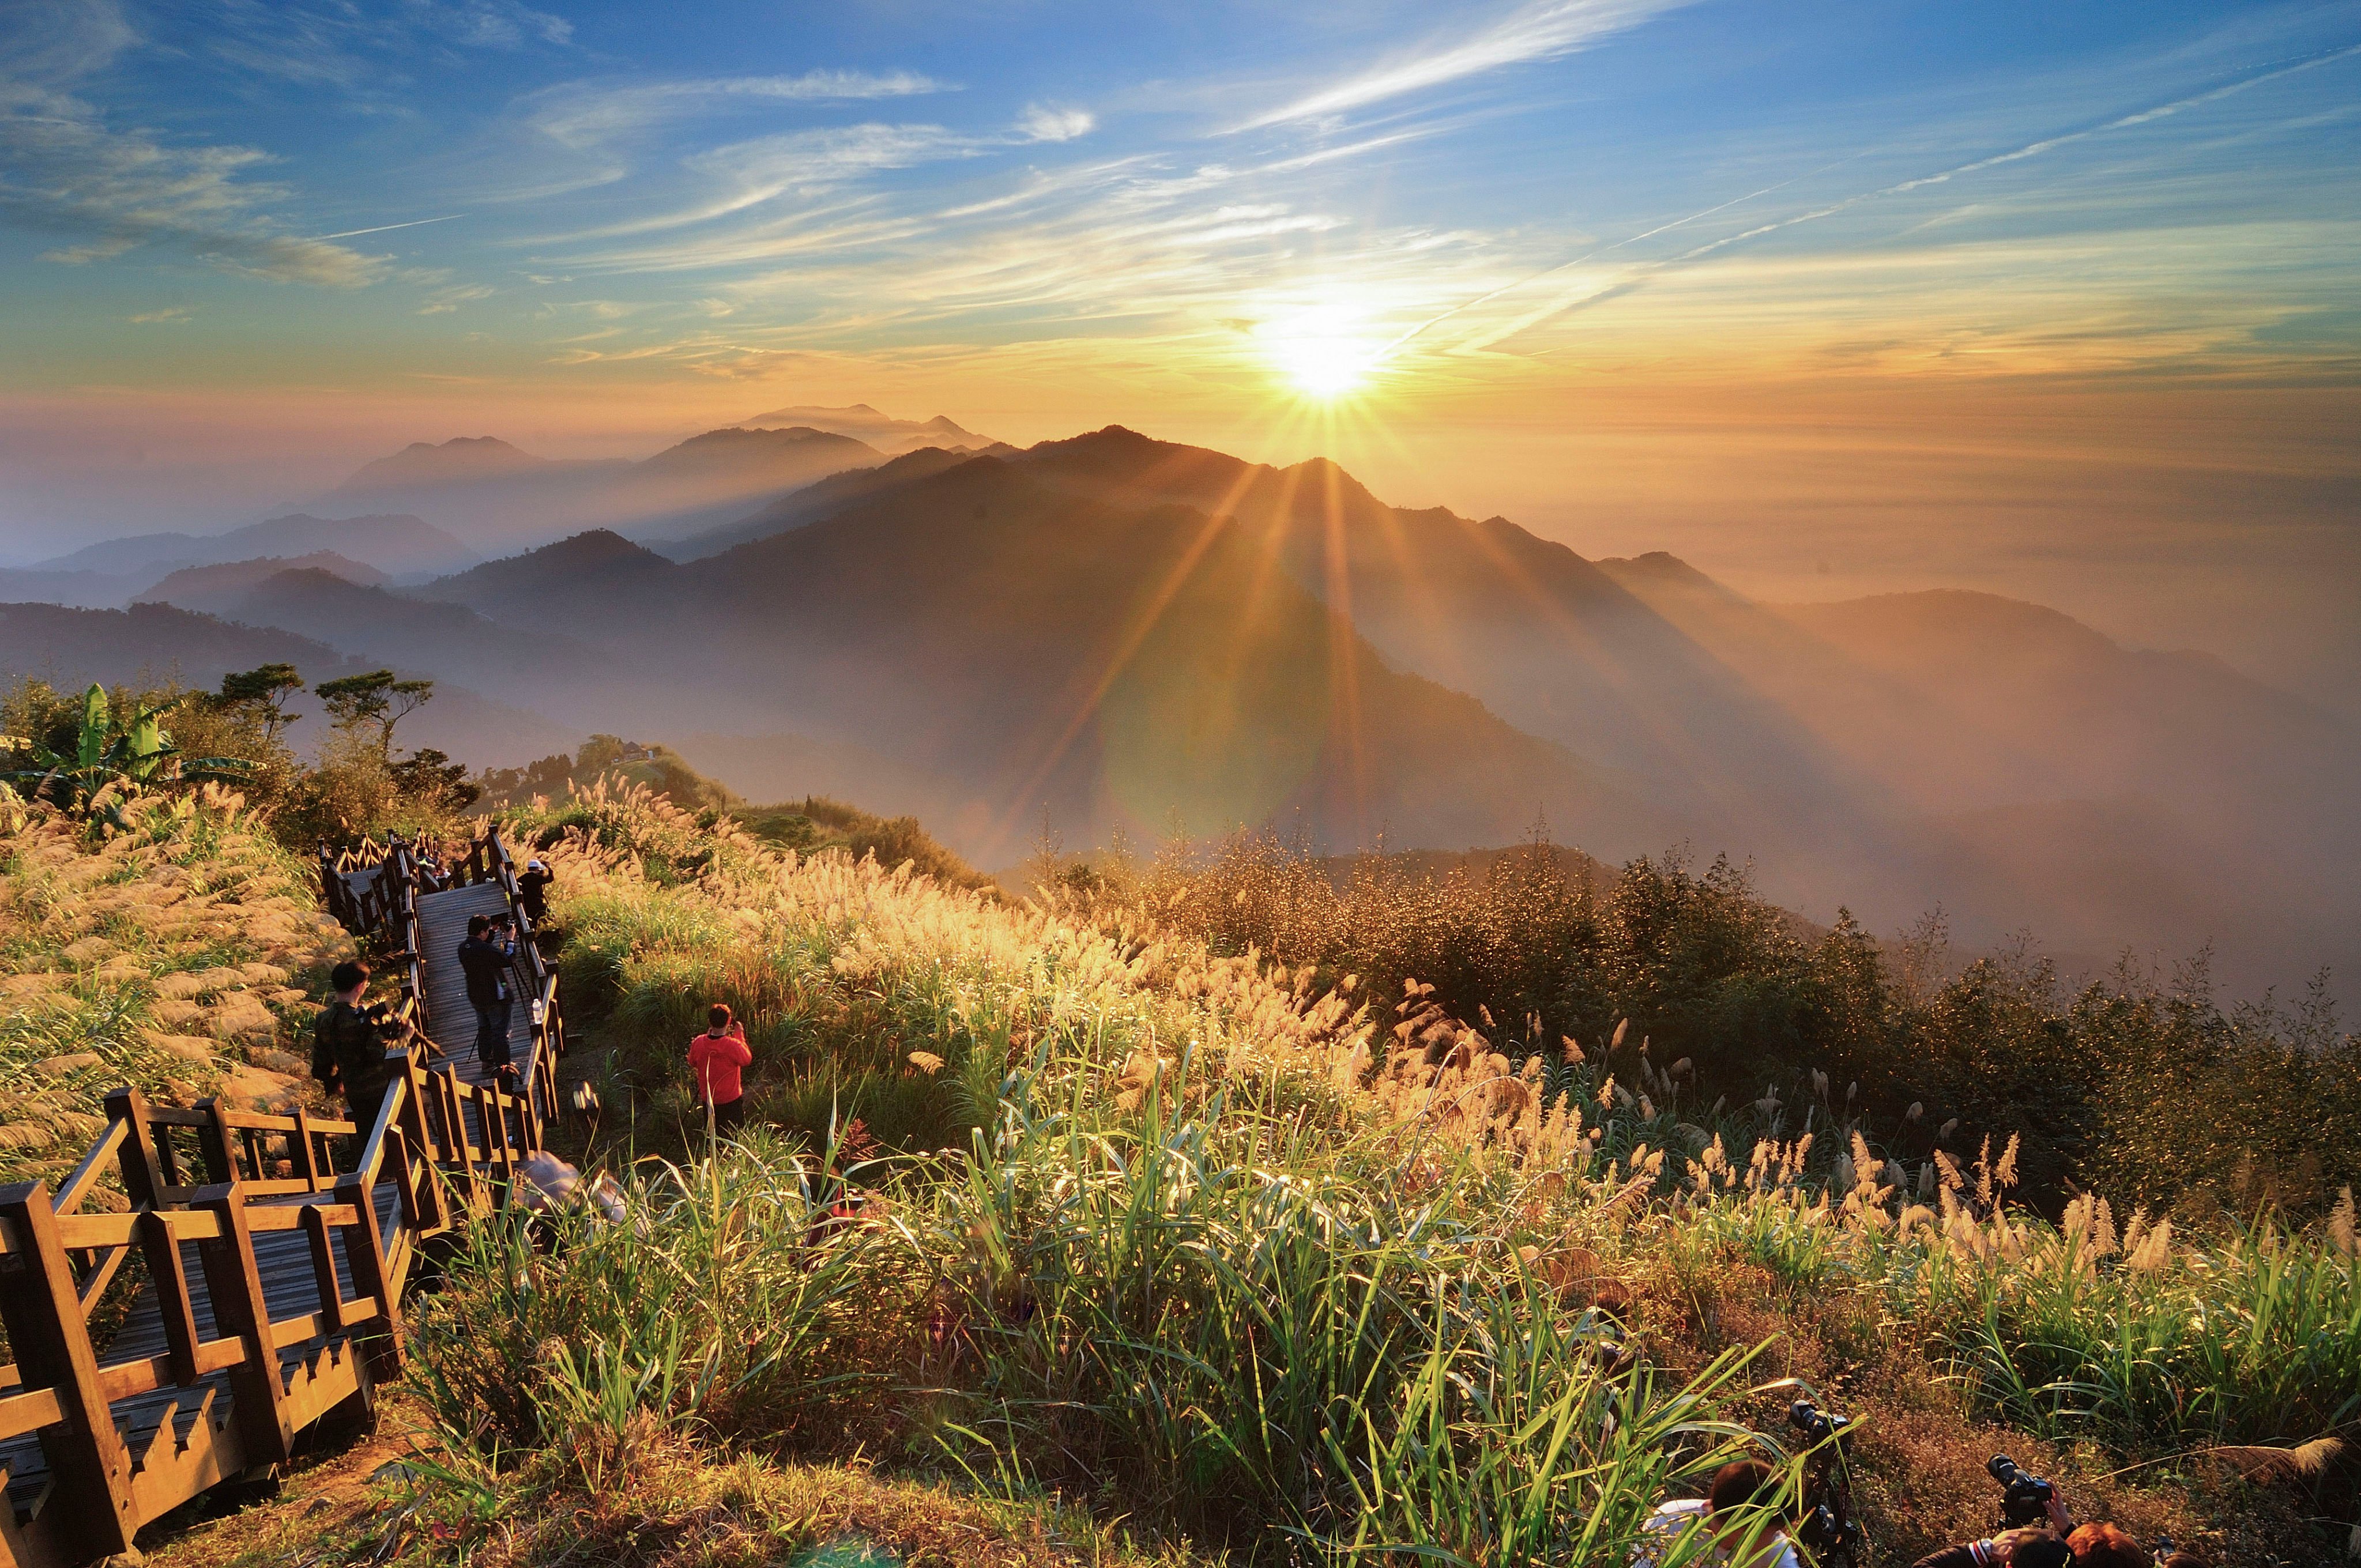 A popular tourist destination in central Taiwan, Alishan (above) has forests, mountains, and tea and coffee plantations. Photo: Getty Images